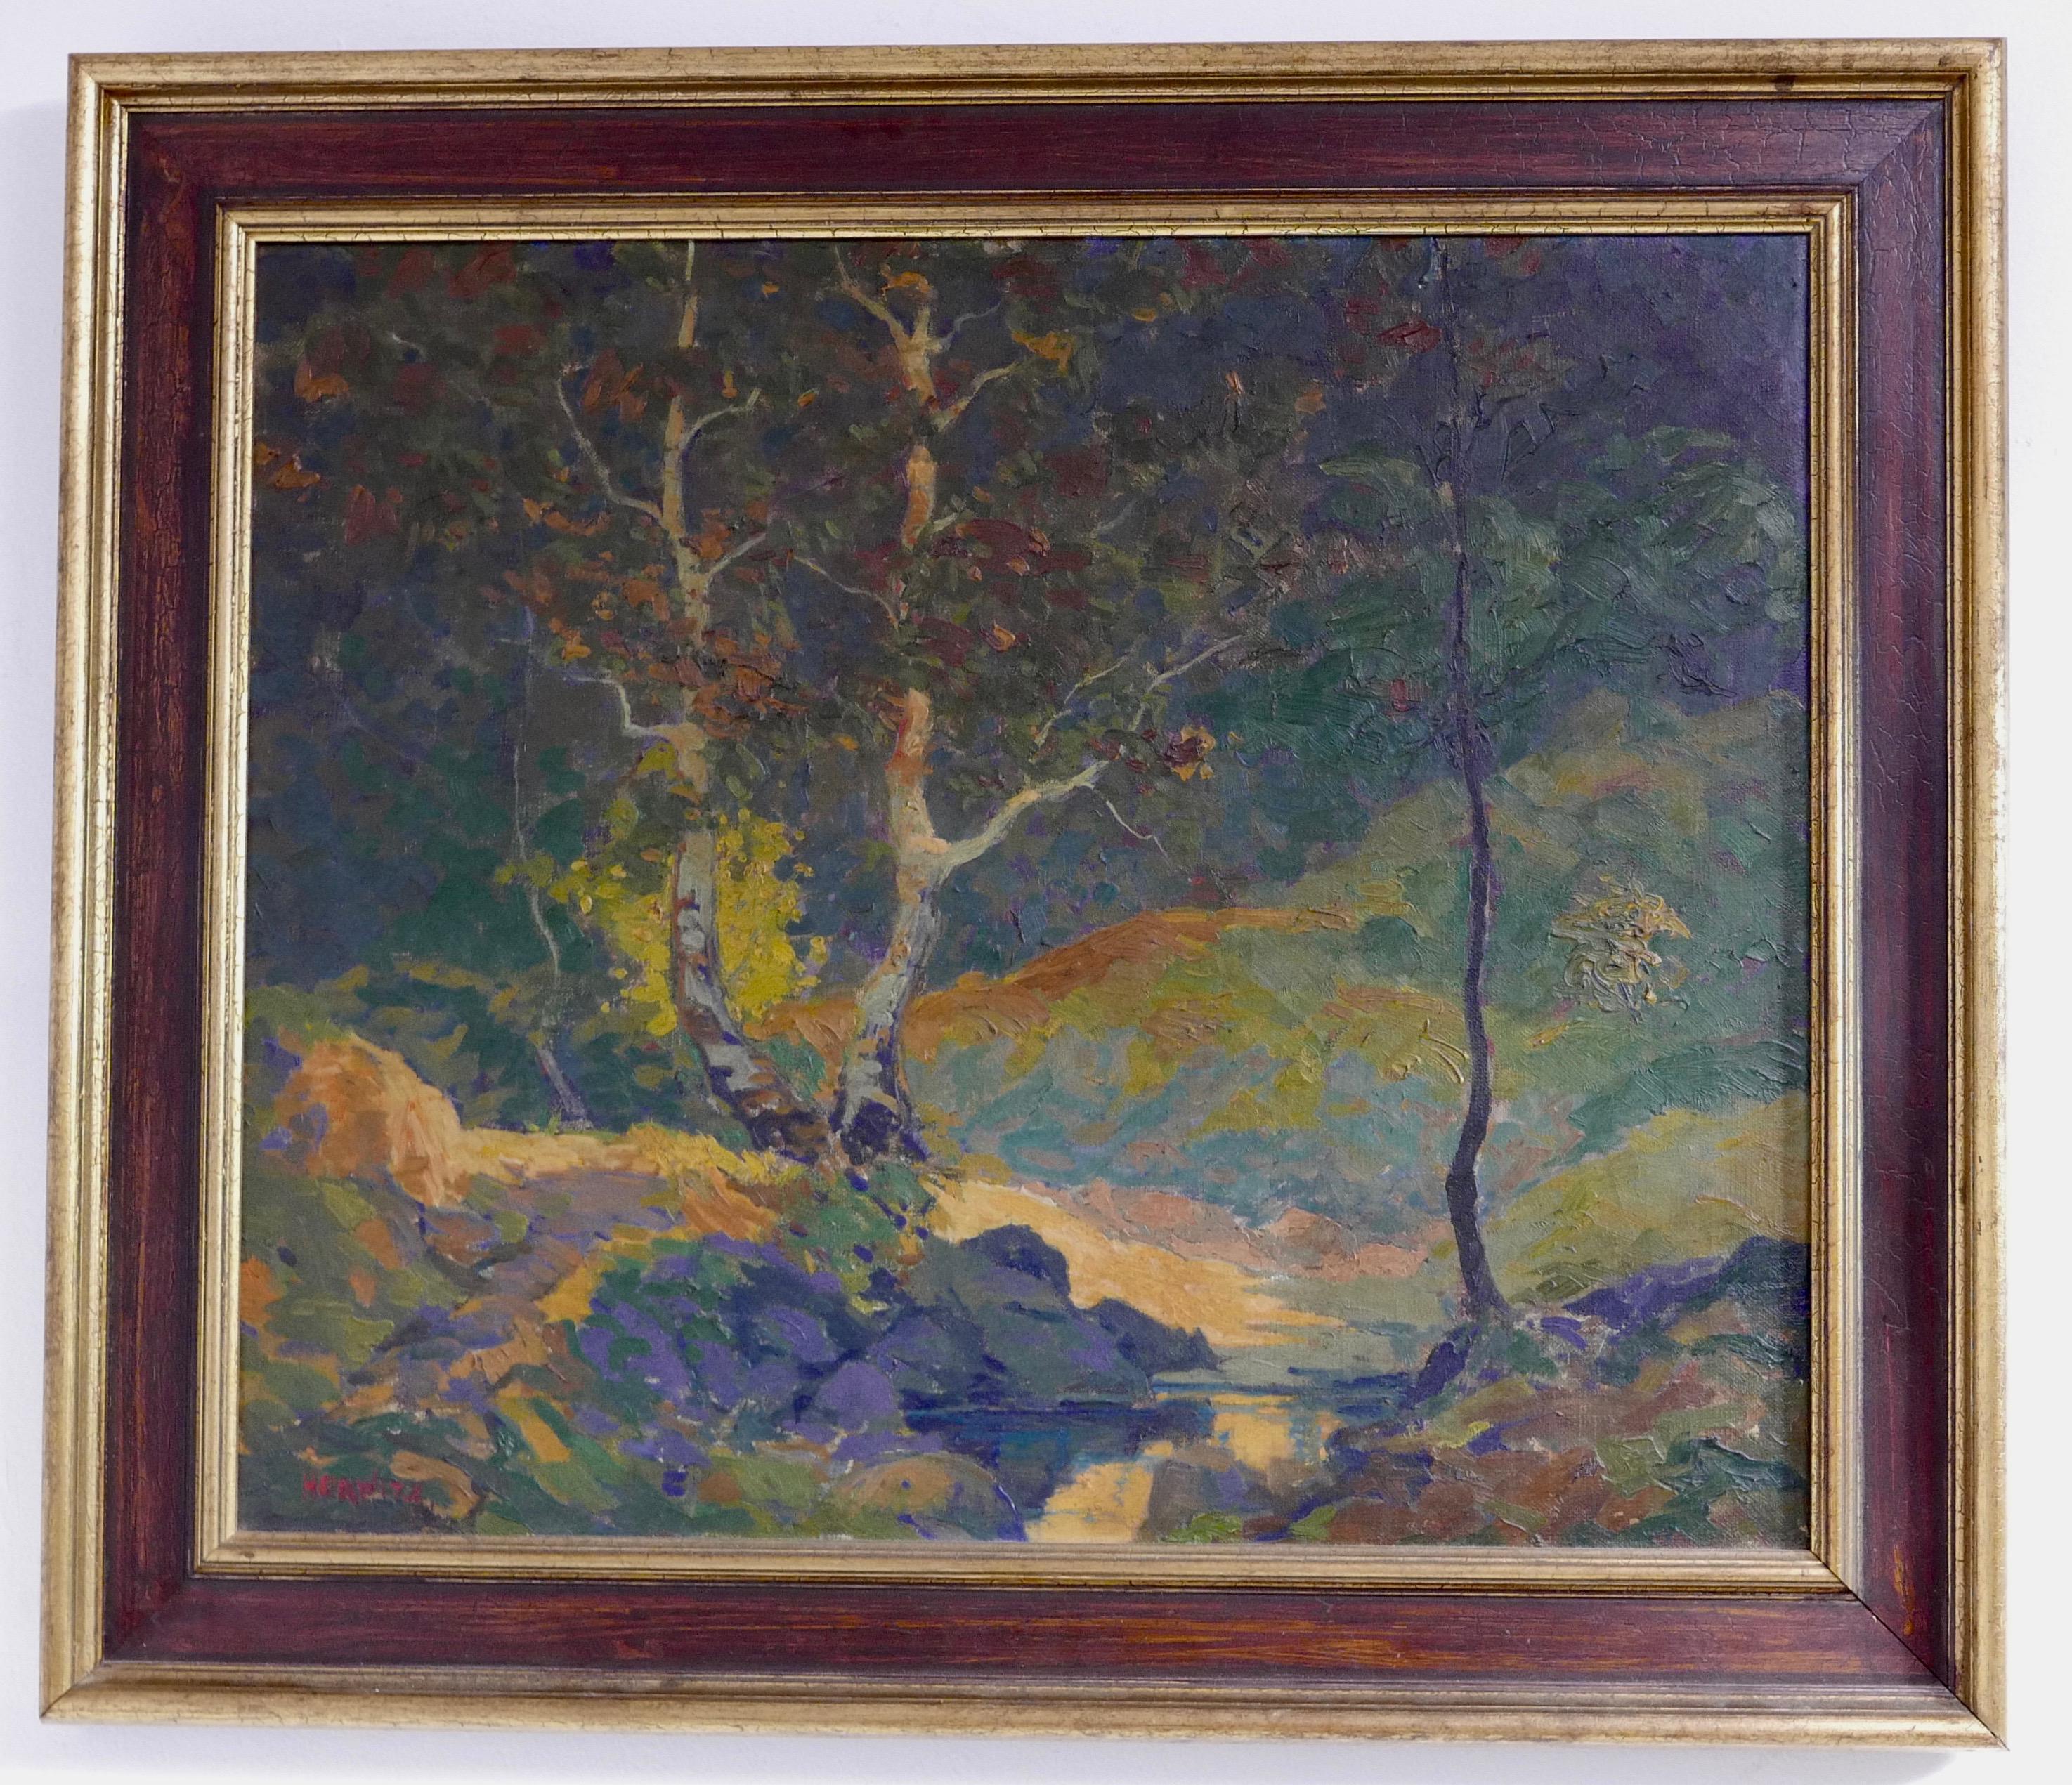 Abstract/ Impressionist Landscape by Russian/American William N. Horwitz, c 1924 1